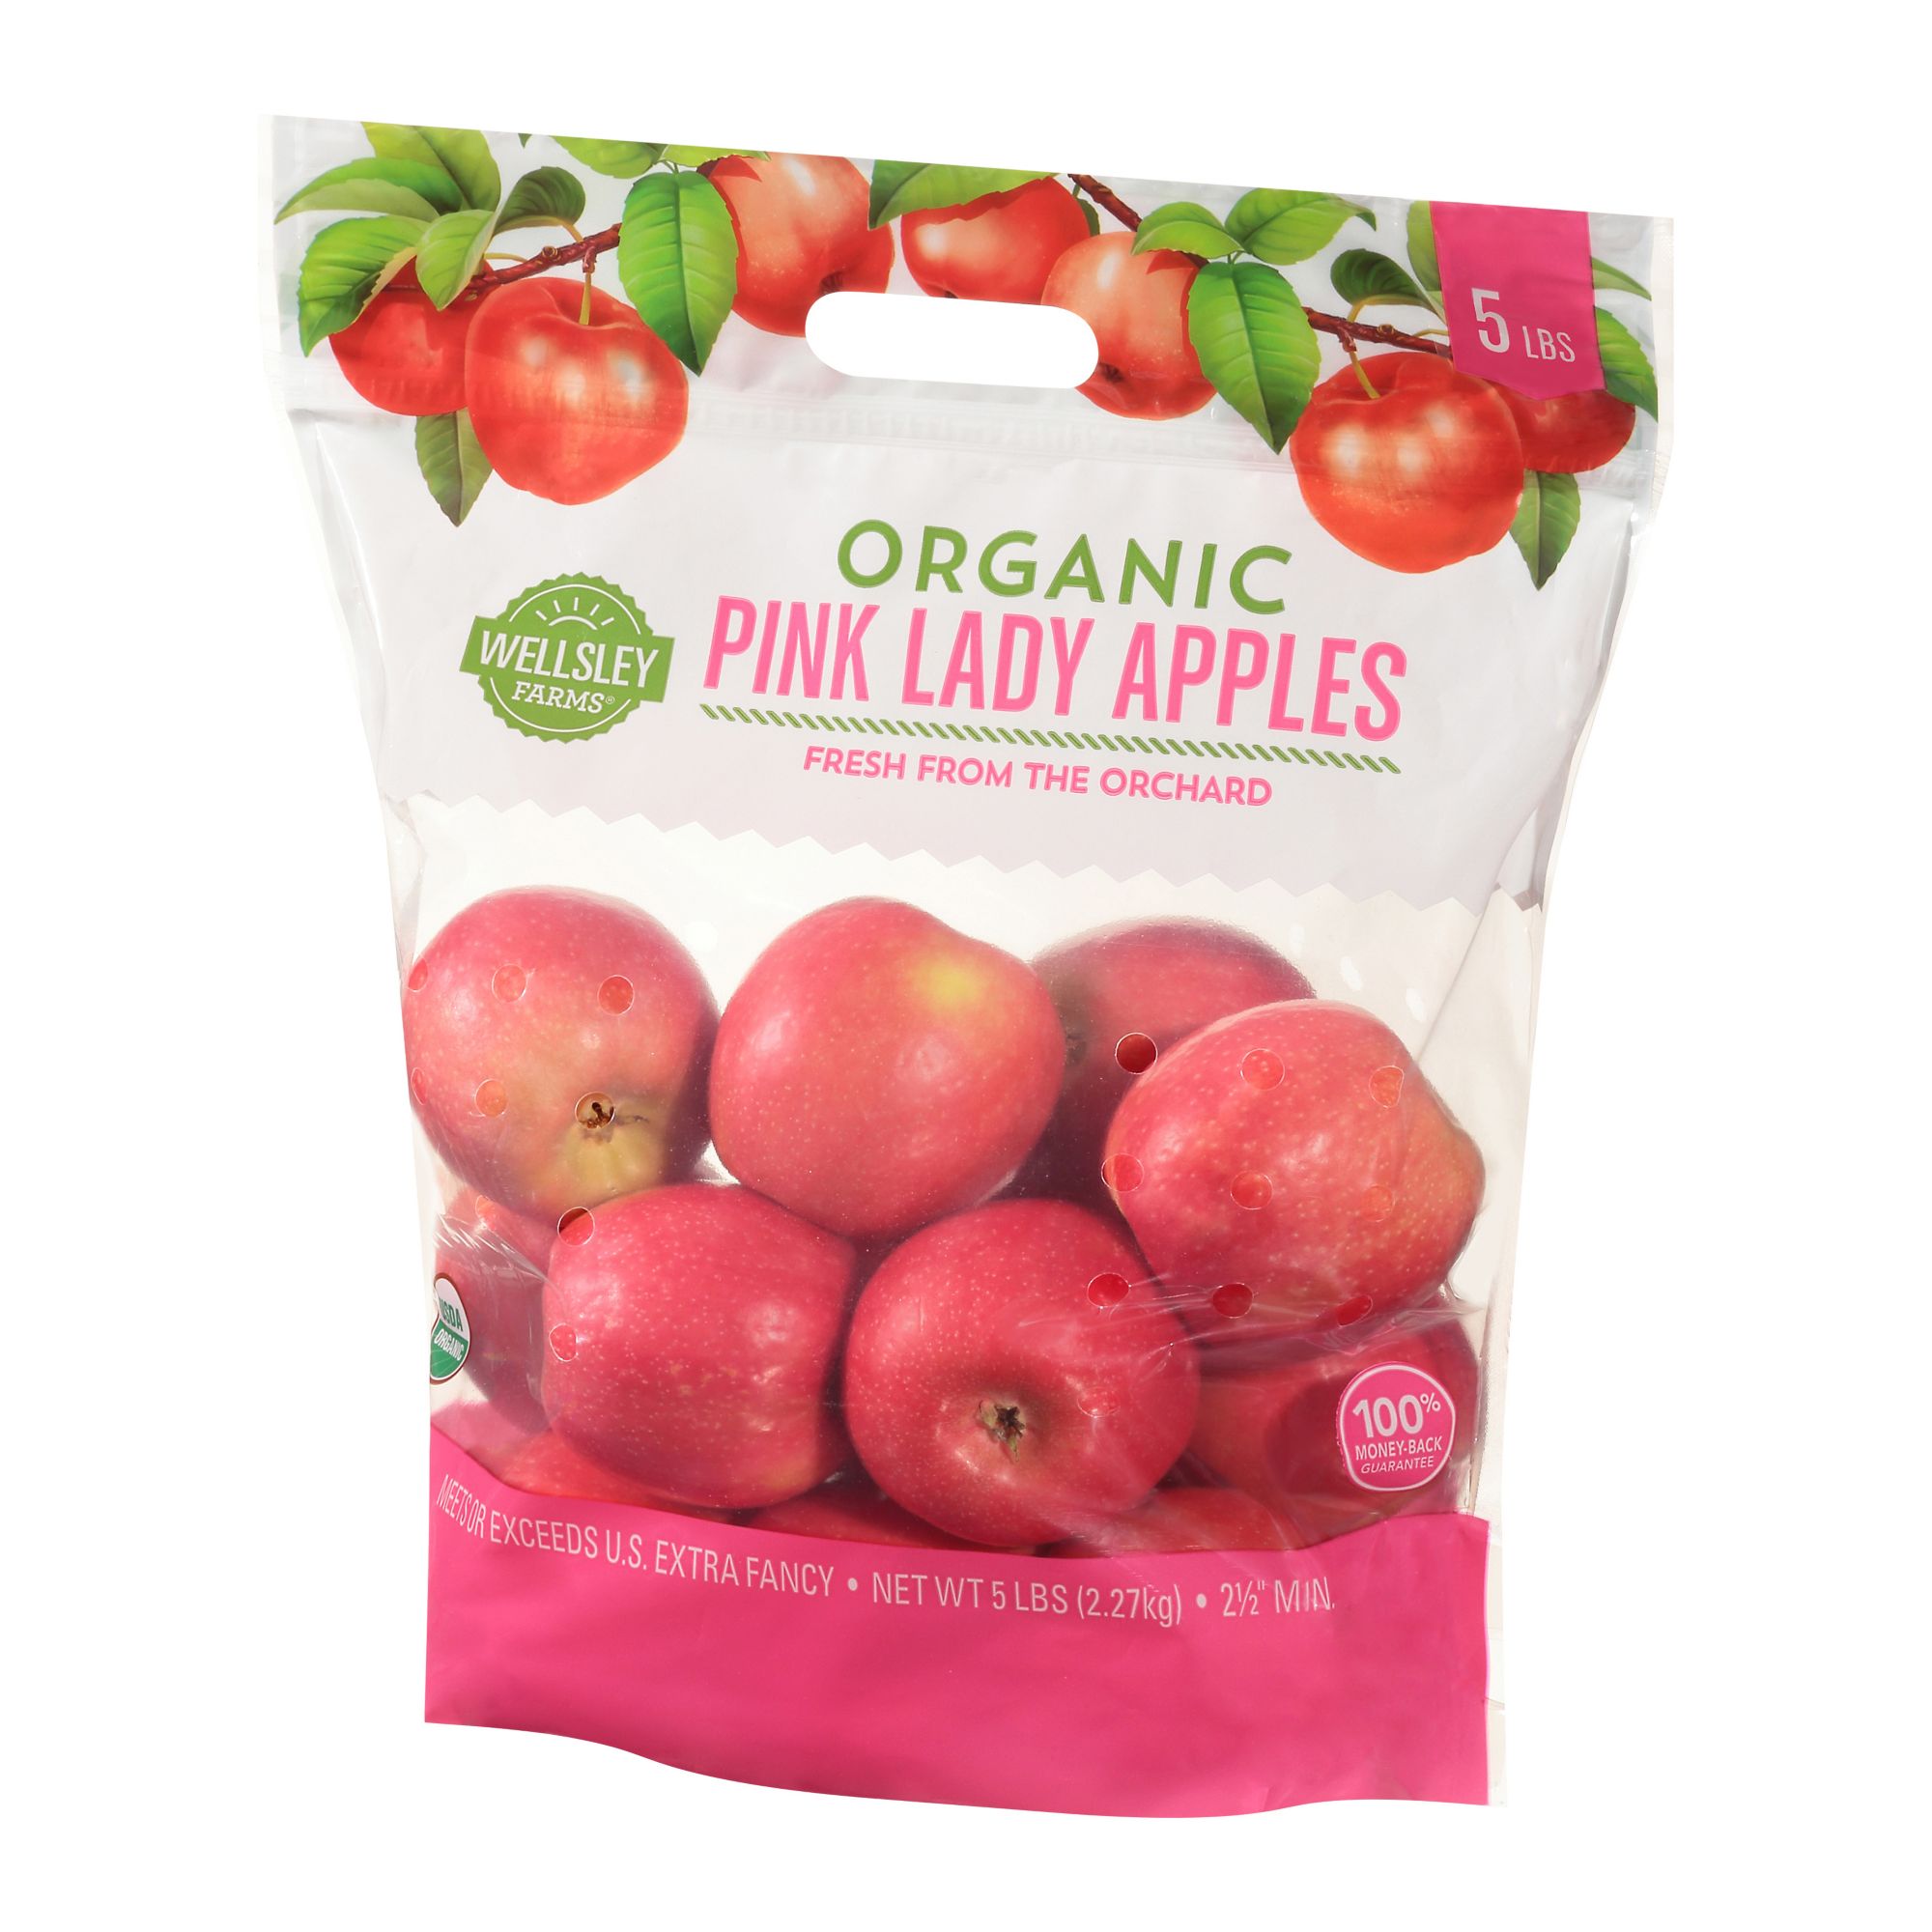 8 Packs: 5 ct. (40 total) Red Delicious Apples by Ashland® 